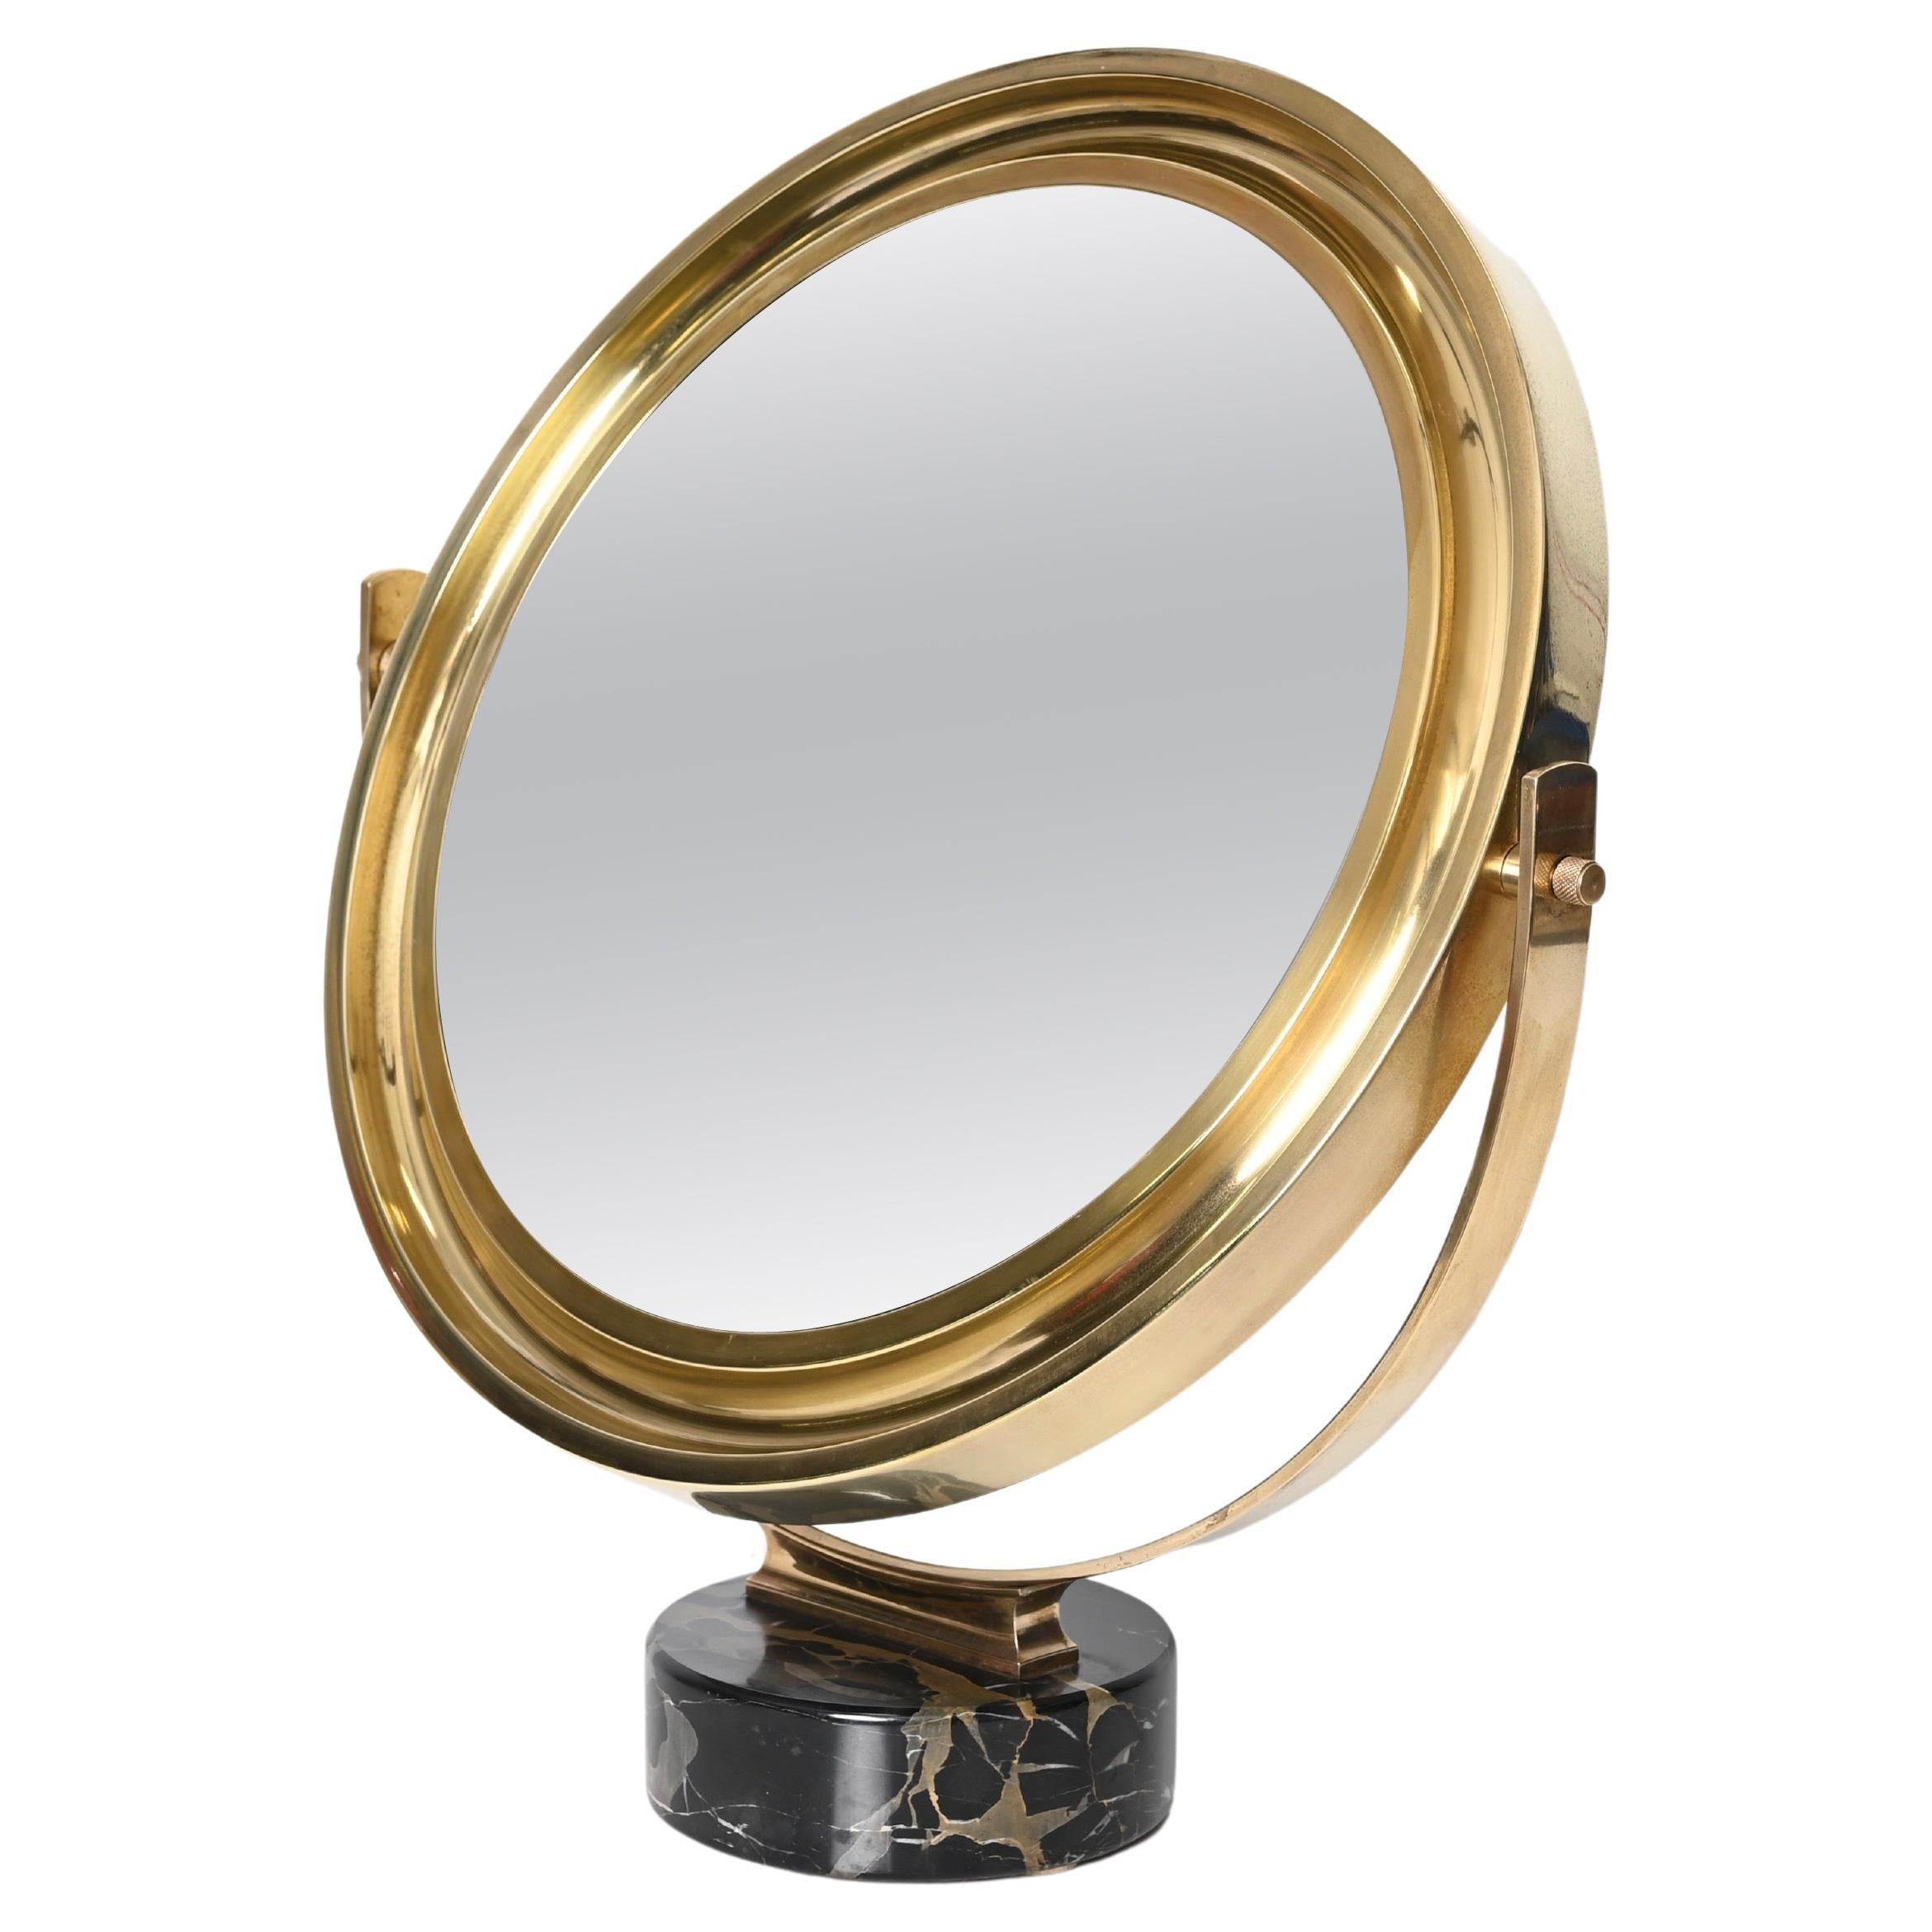 Brass and Black Marble "Narciso" Table Mirror by Mazza for Artemide, Italy 1960s